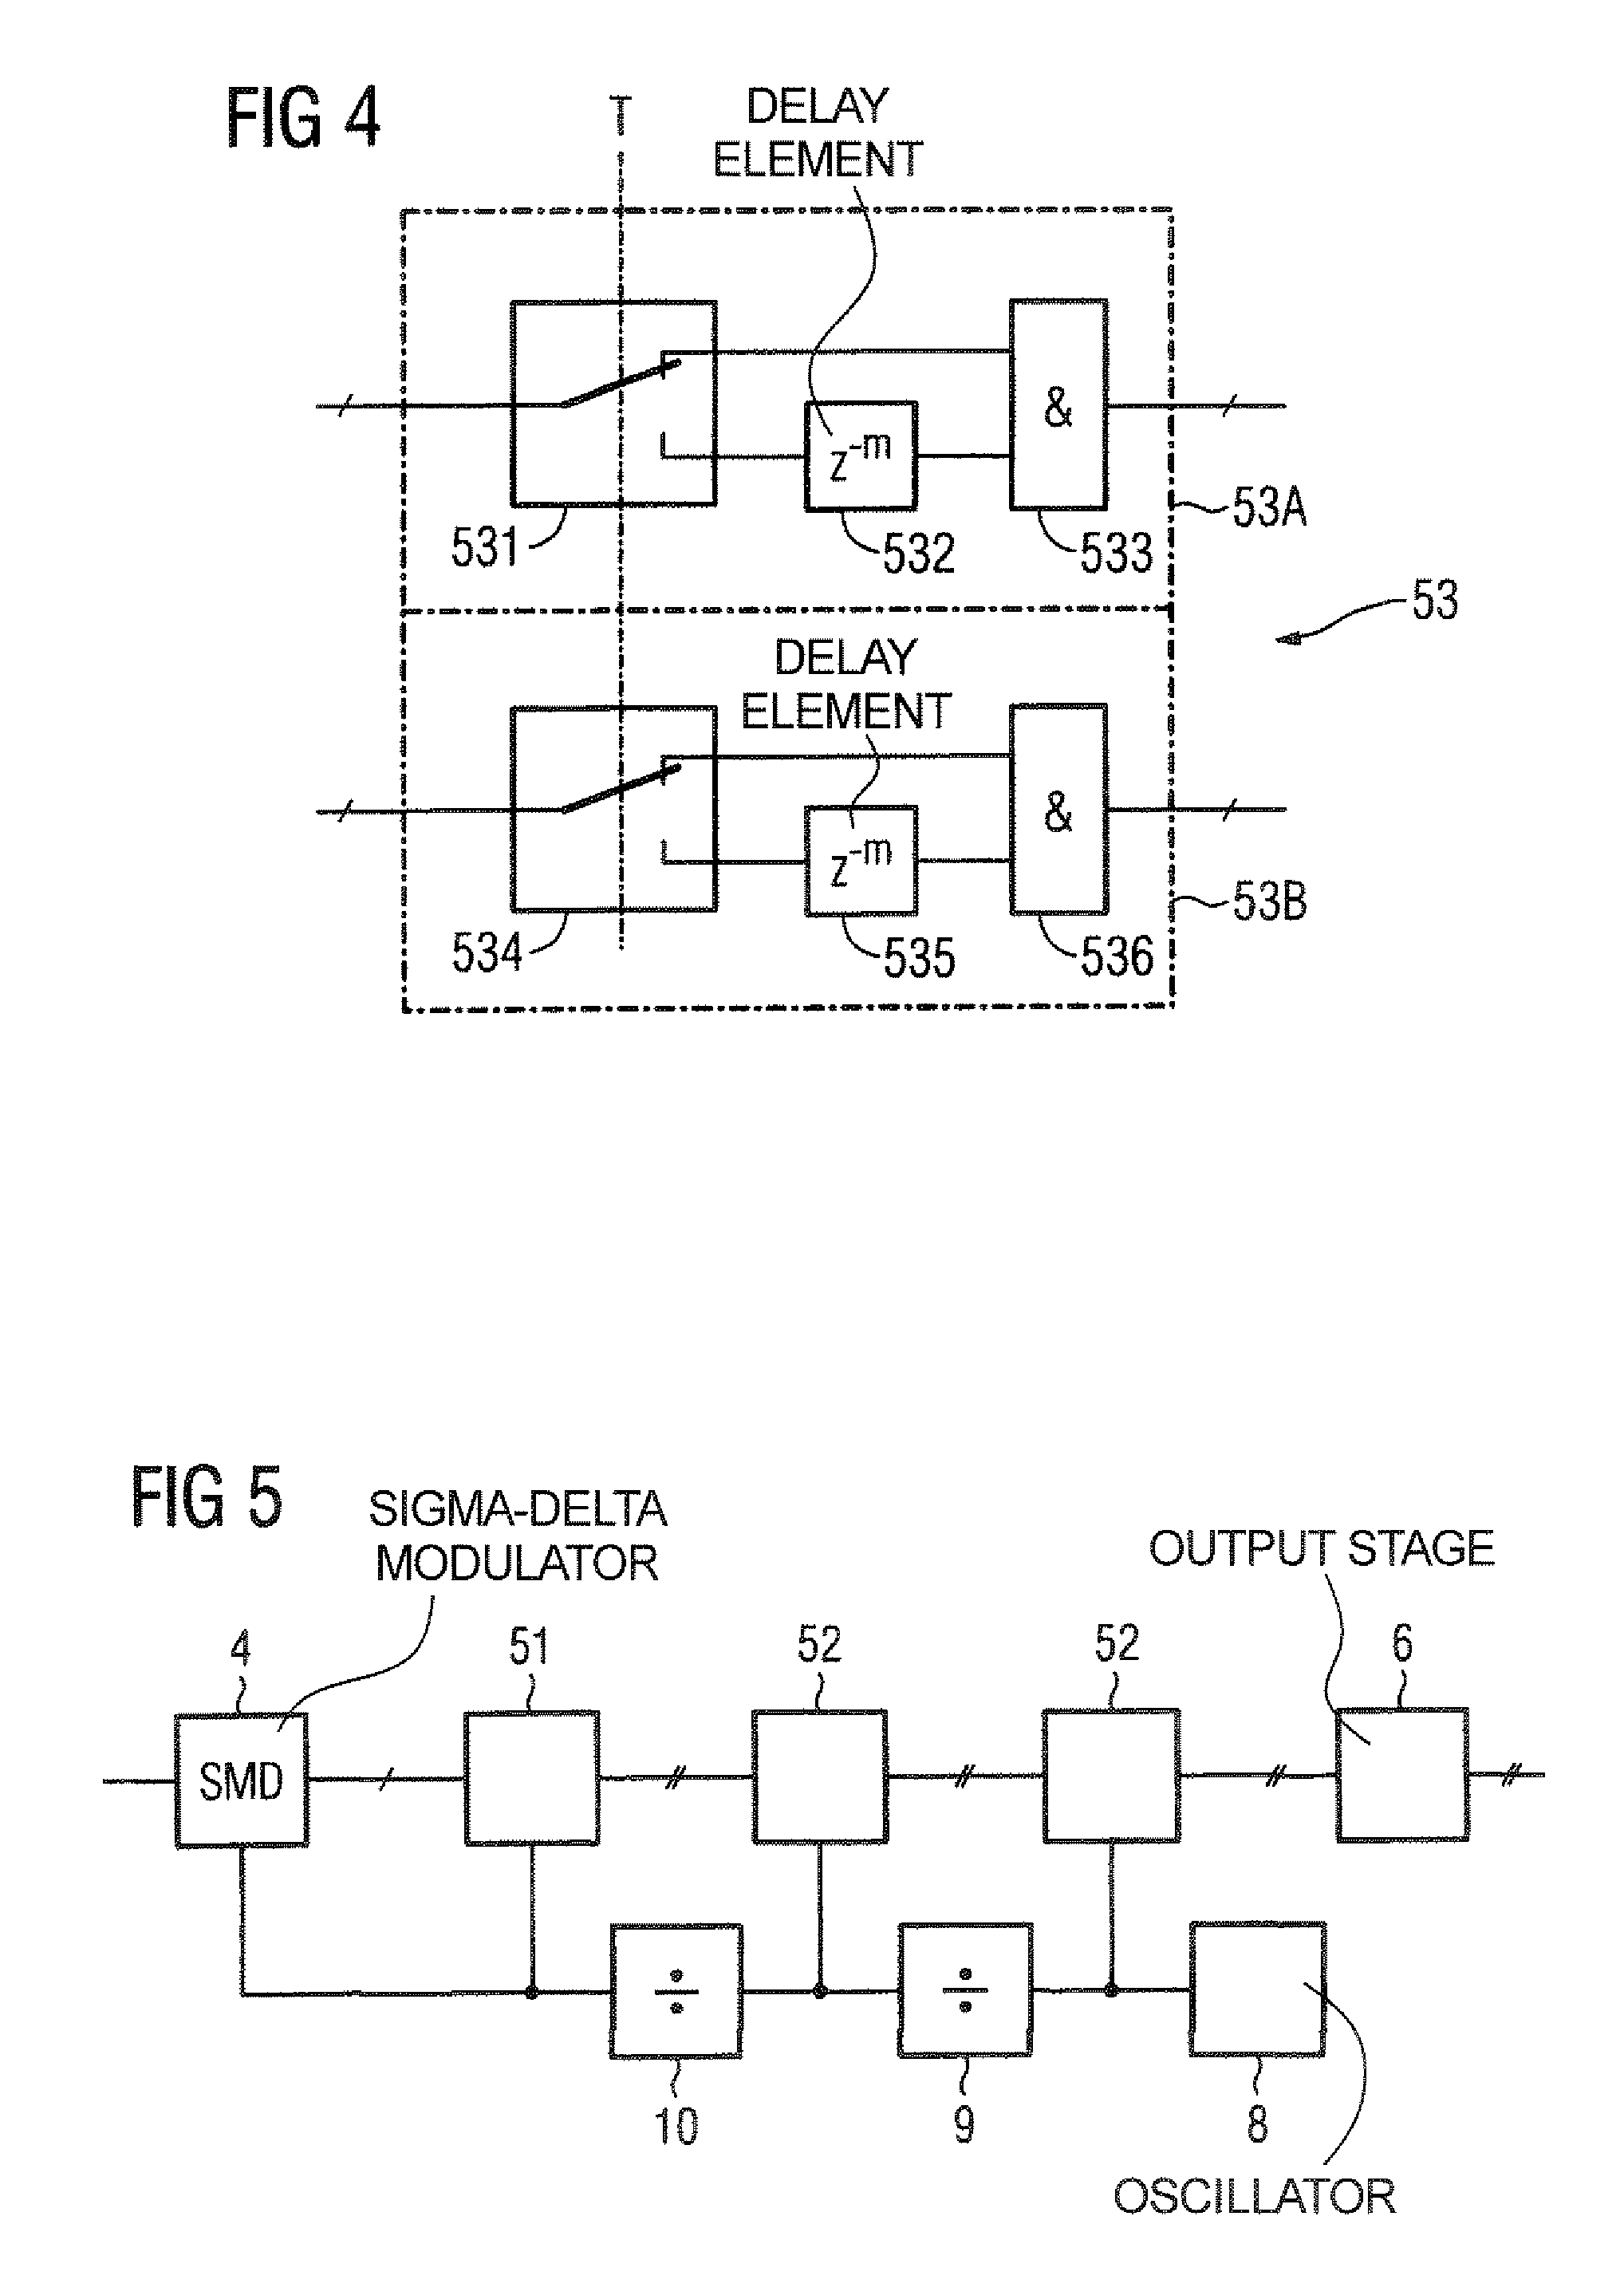 Hearing aid device with an output amplifier having a sigma-delta modulator